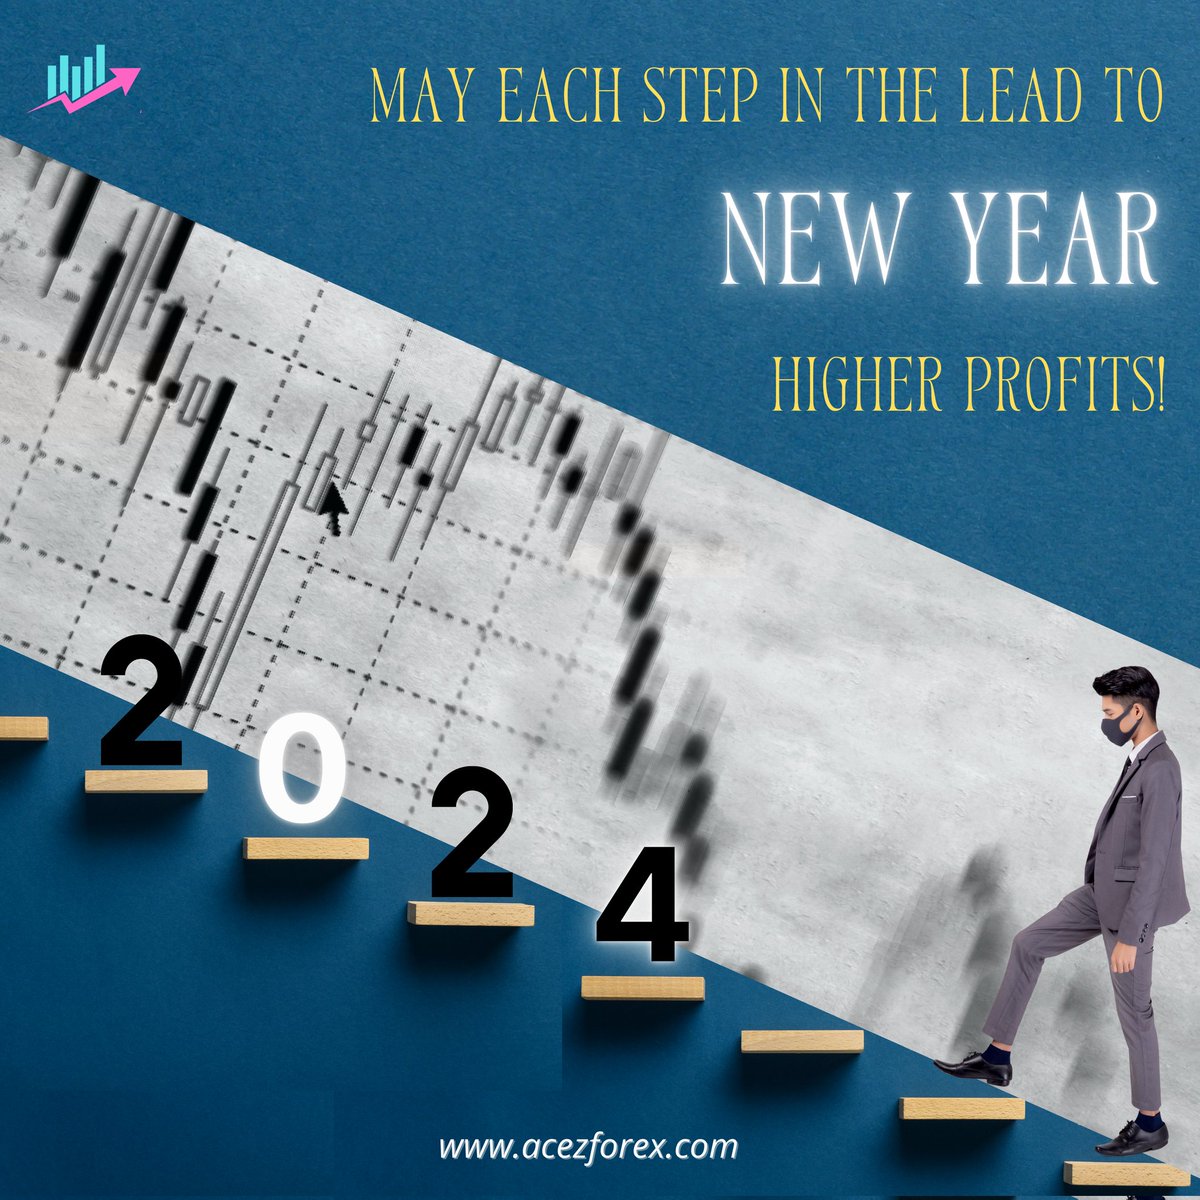 New year, new opportunities on the trading floor. Let's make every pip count. 💼💰 
Follow👉 @Acez_Forex

#ForexTrading
#FXMarket
#CurrencyTrading
#ForexSignals
#TradingStrategy
#ForexLifestyle
#TechnicalAnalysis
#DayTrading
#Pips
#ForexEducation
#TradingView